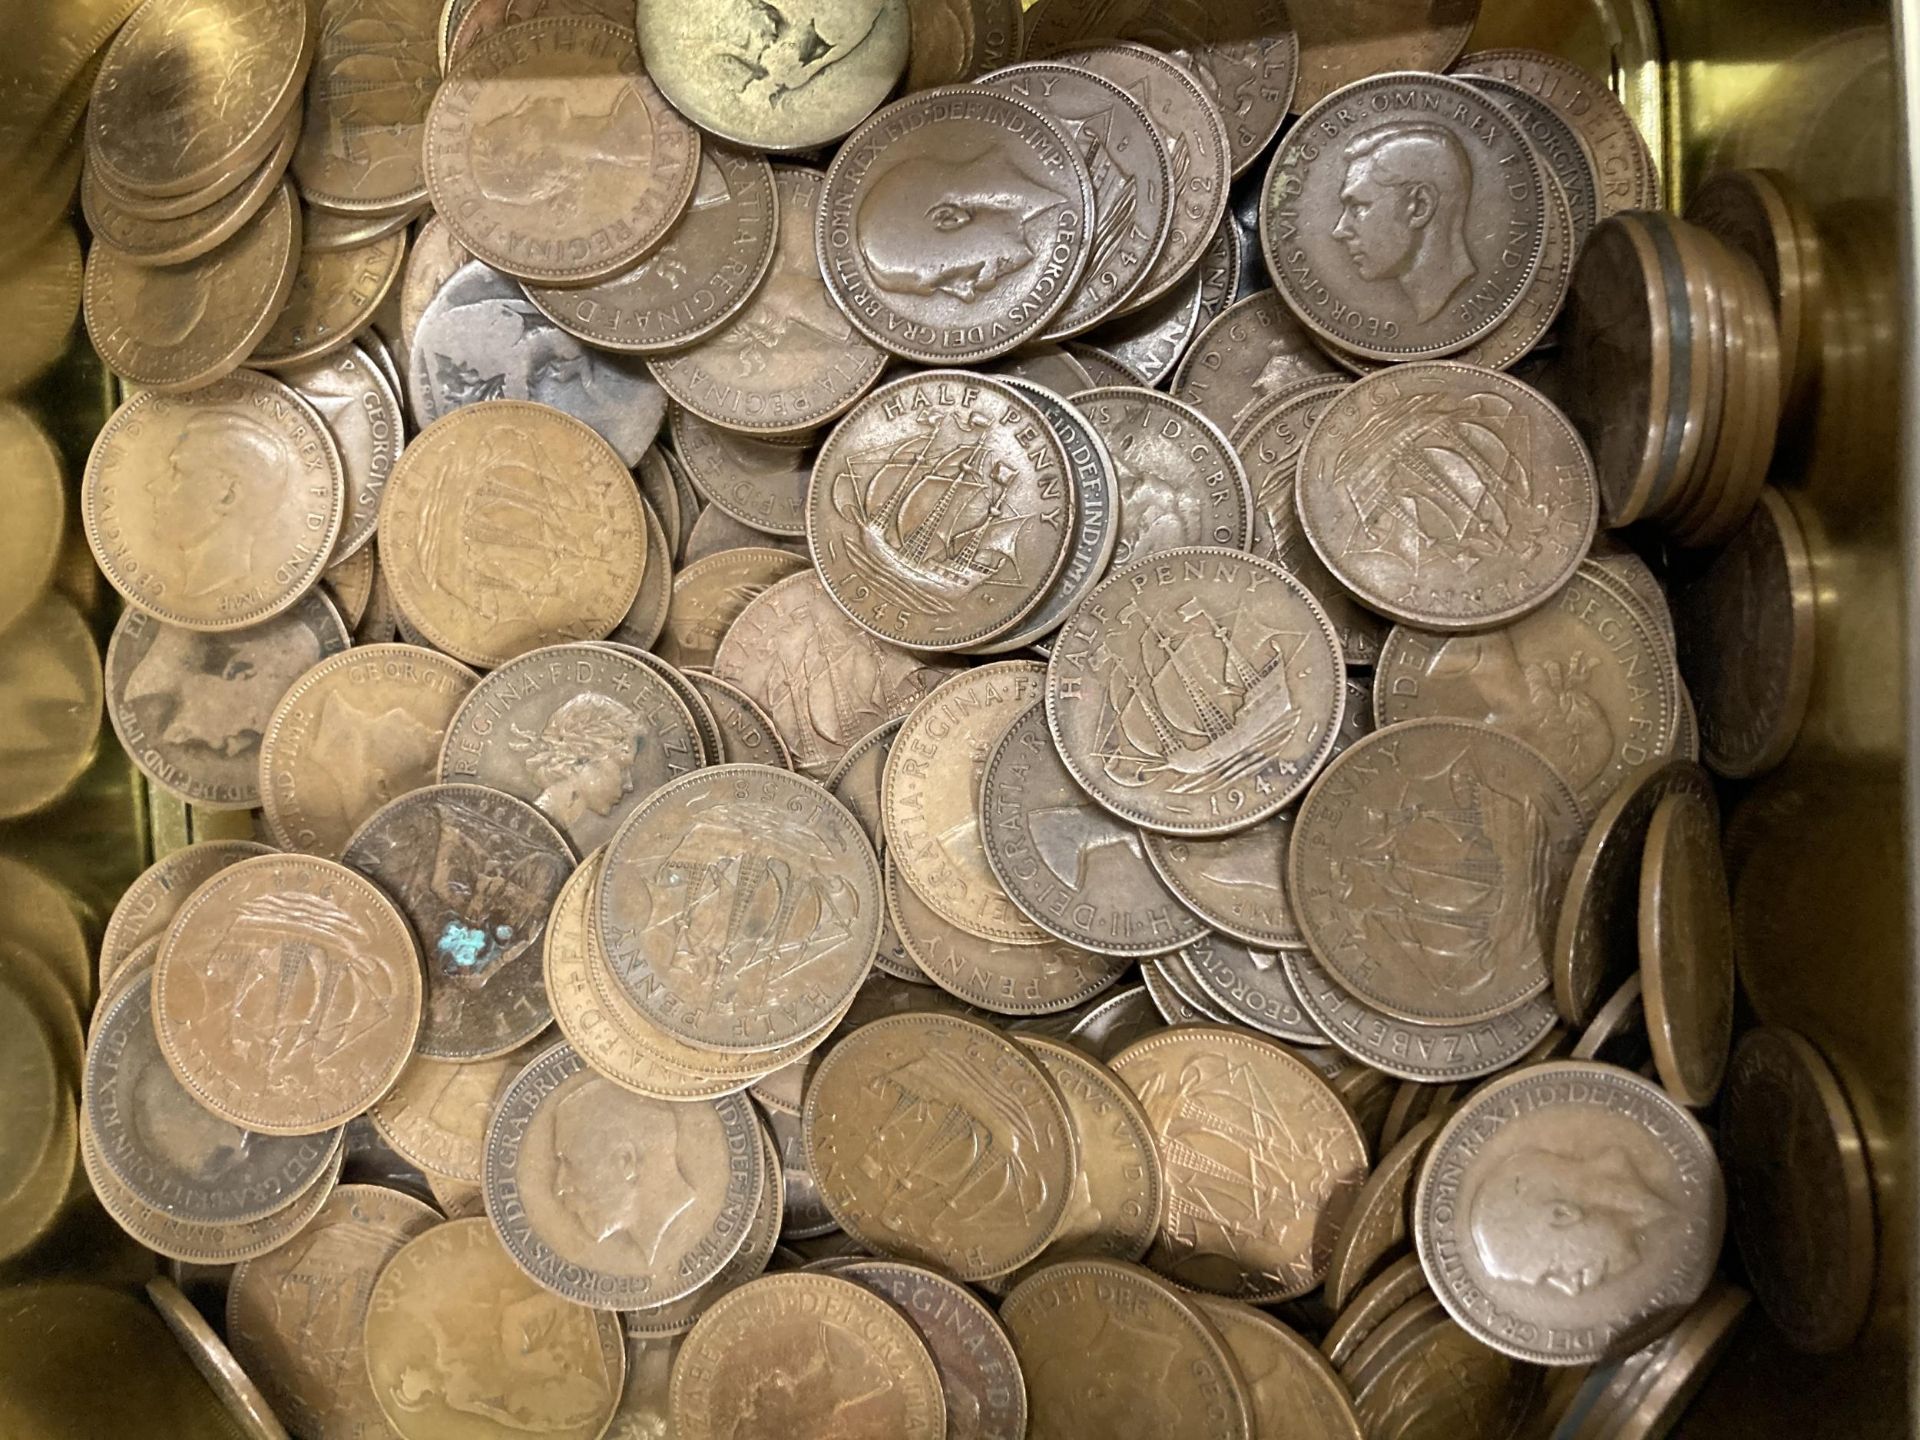 A COLLECTION OF PRE-DECIMAL COINS TO INCLUDE THREEPENNY BITS, SIXPENCES, A FLORIN, PENNIES, HA' - Image 3 of 4